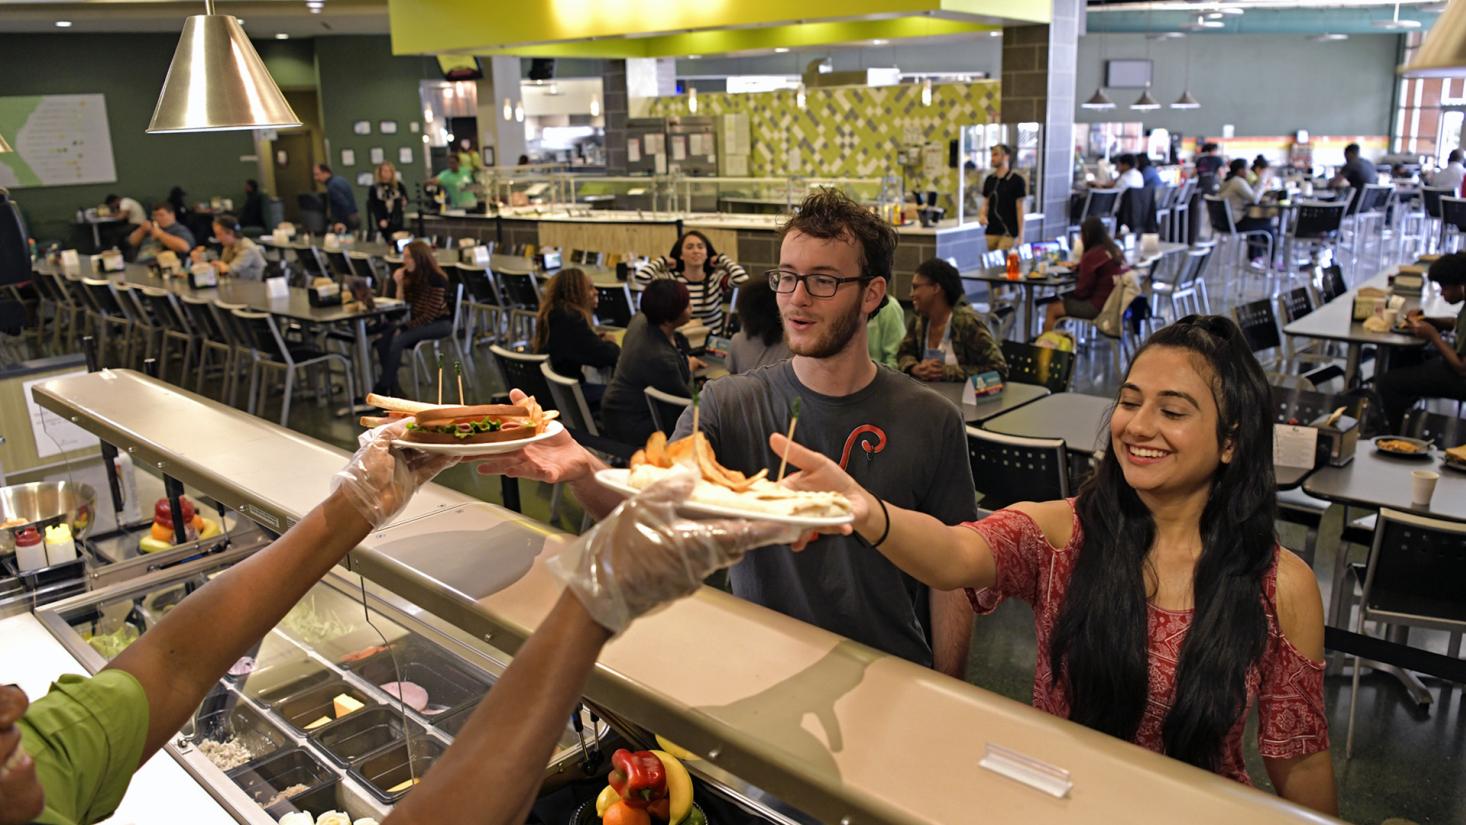 Students eating in the dining hall